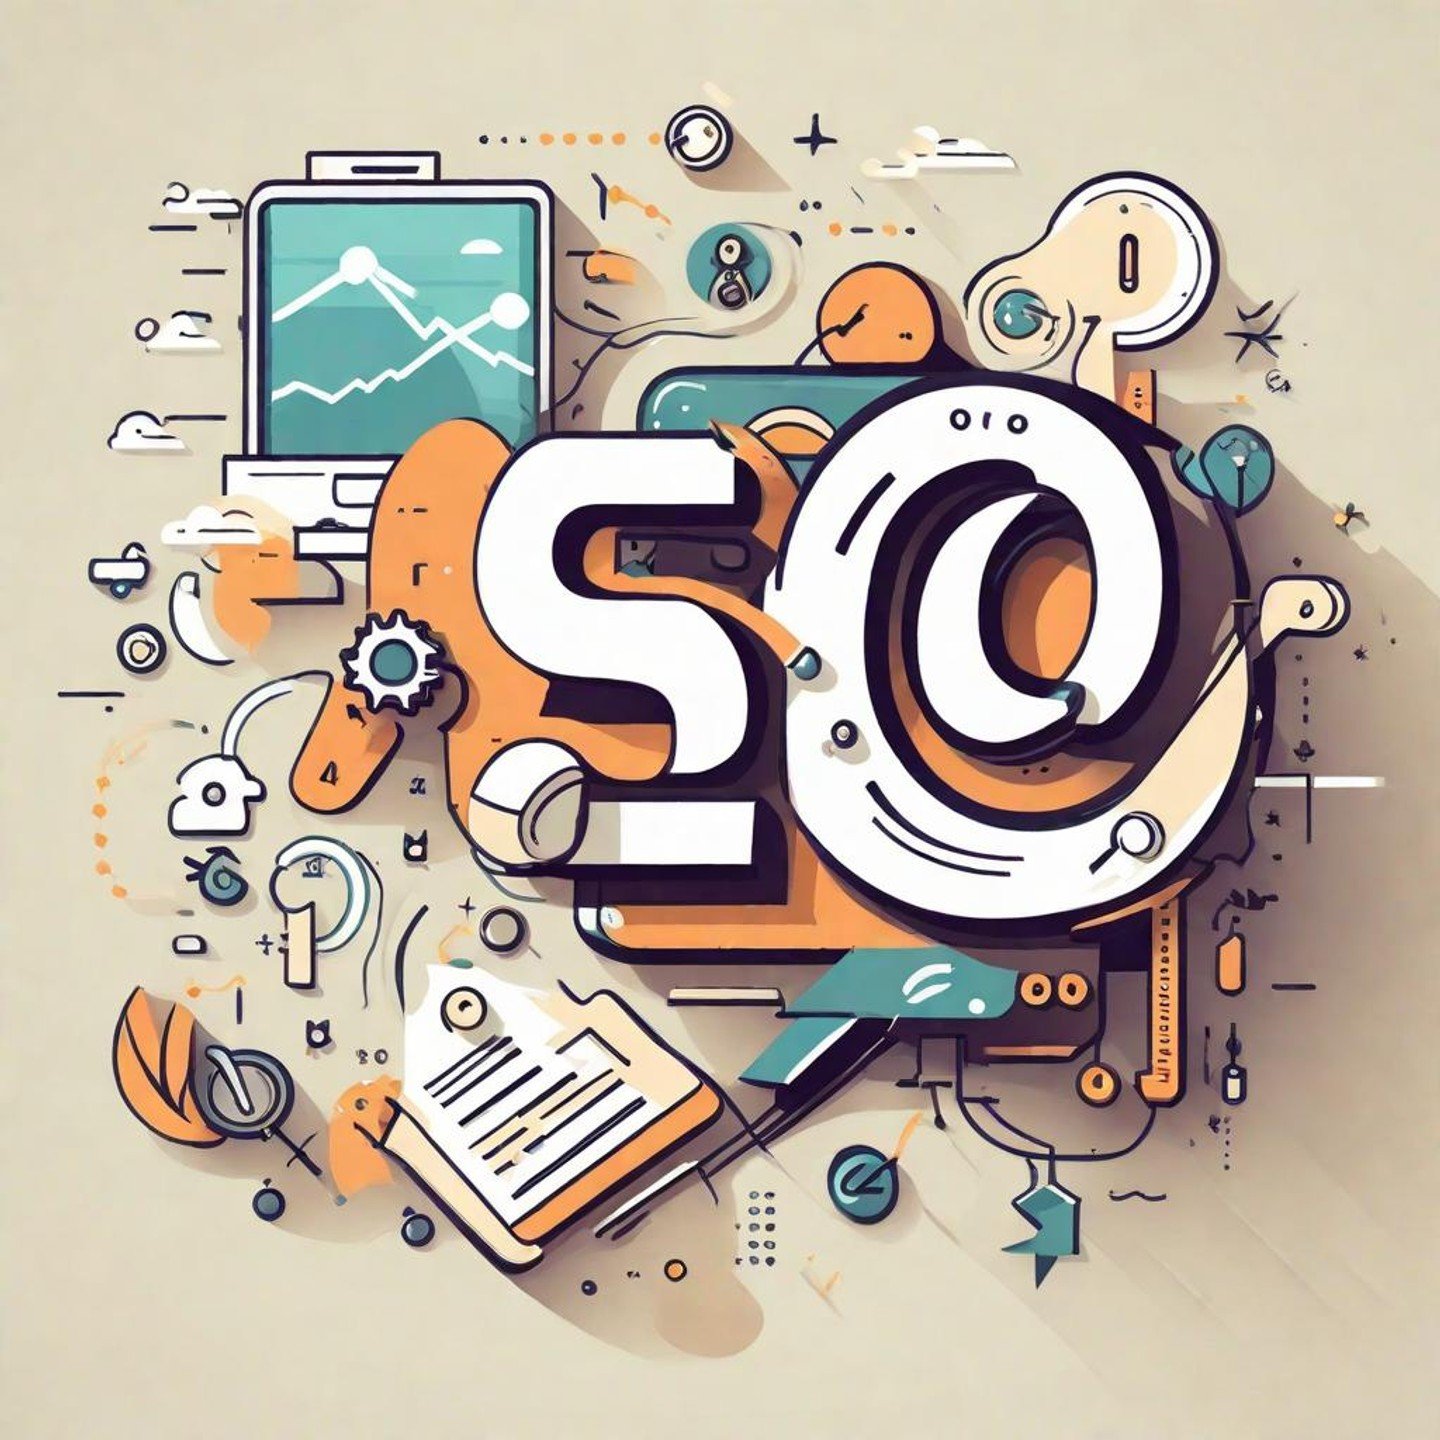 SEO Services in Sector 27-A Faridabad